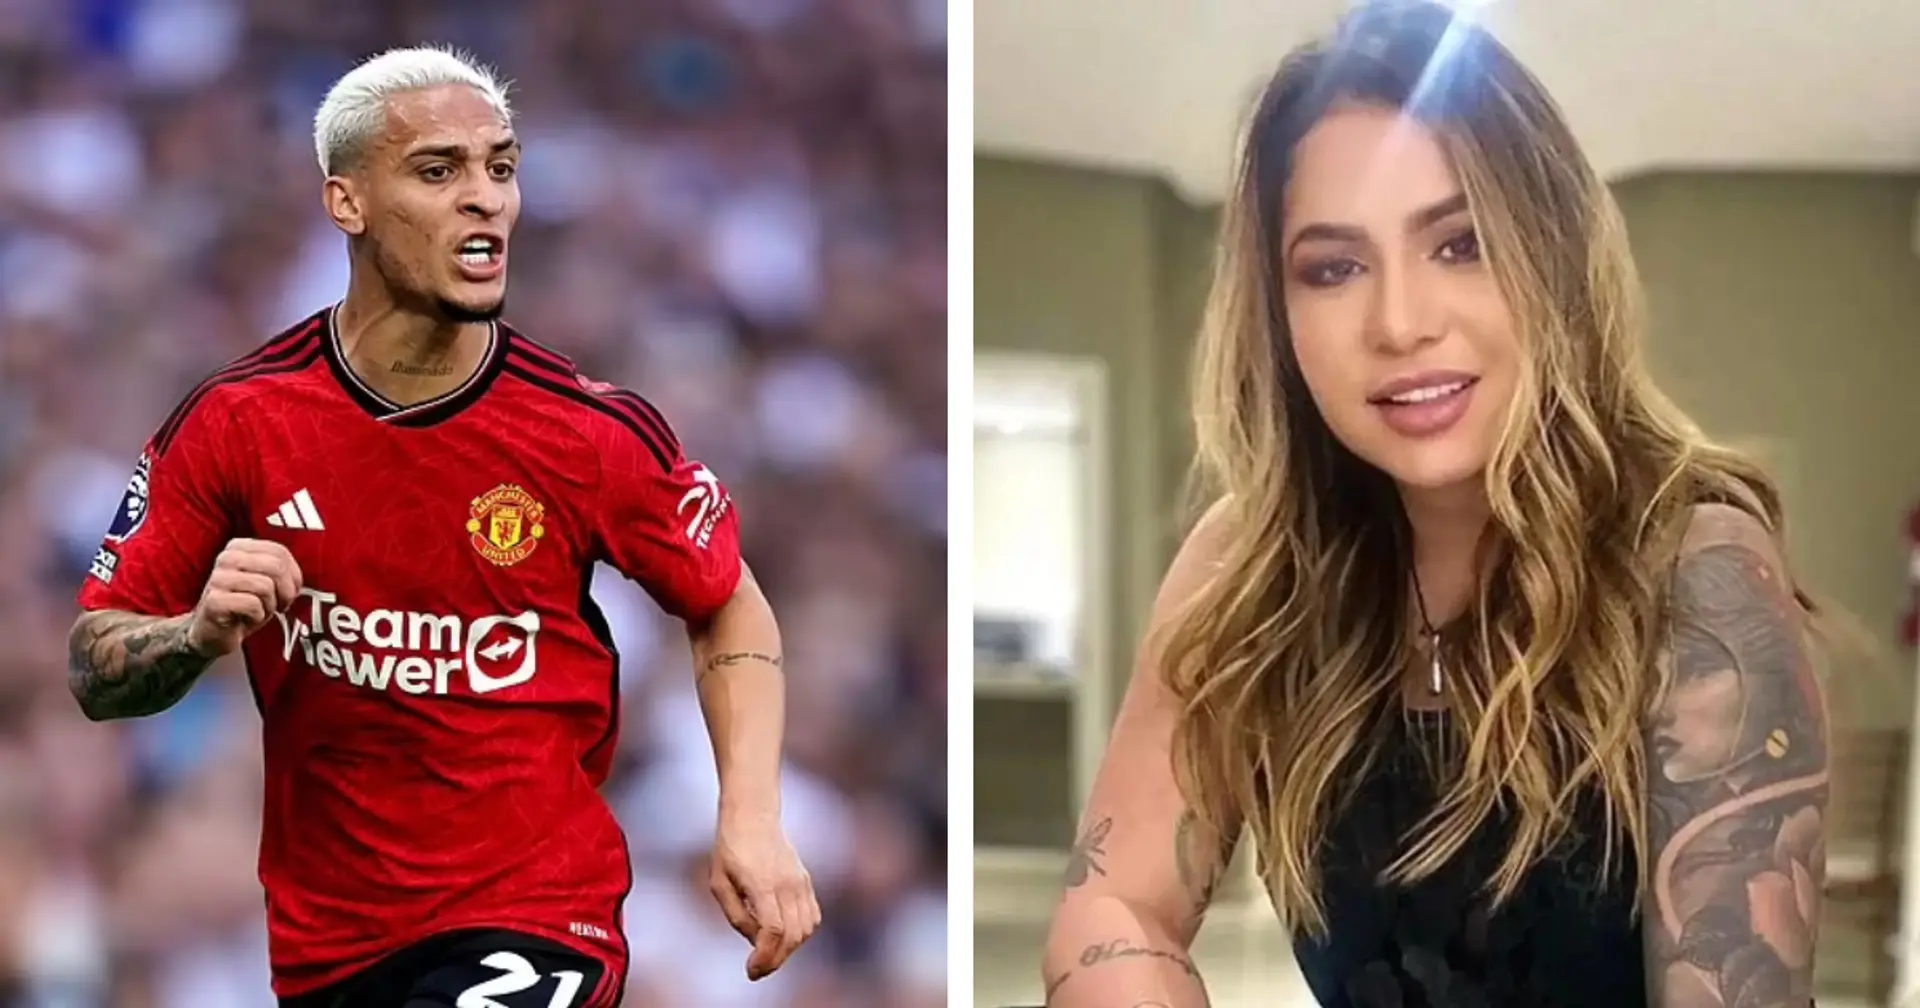 One of the women accusing Antony of assault drops allegations against Man United star - Football | Tribuna.com